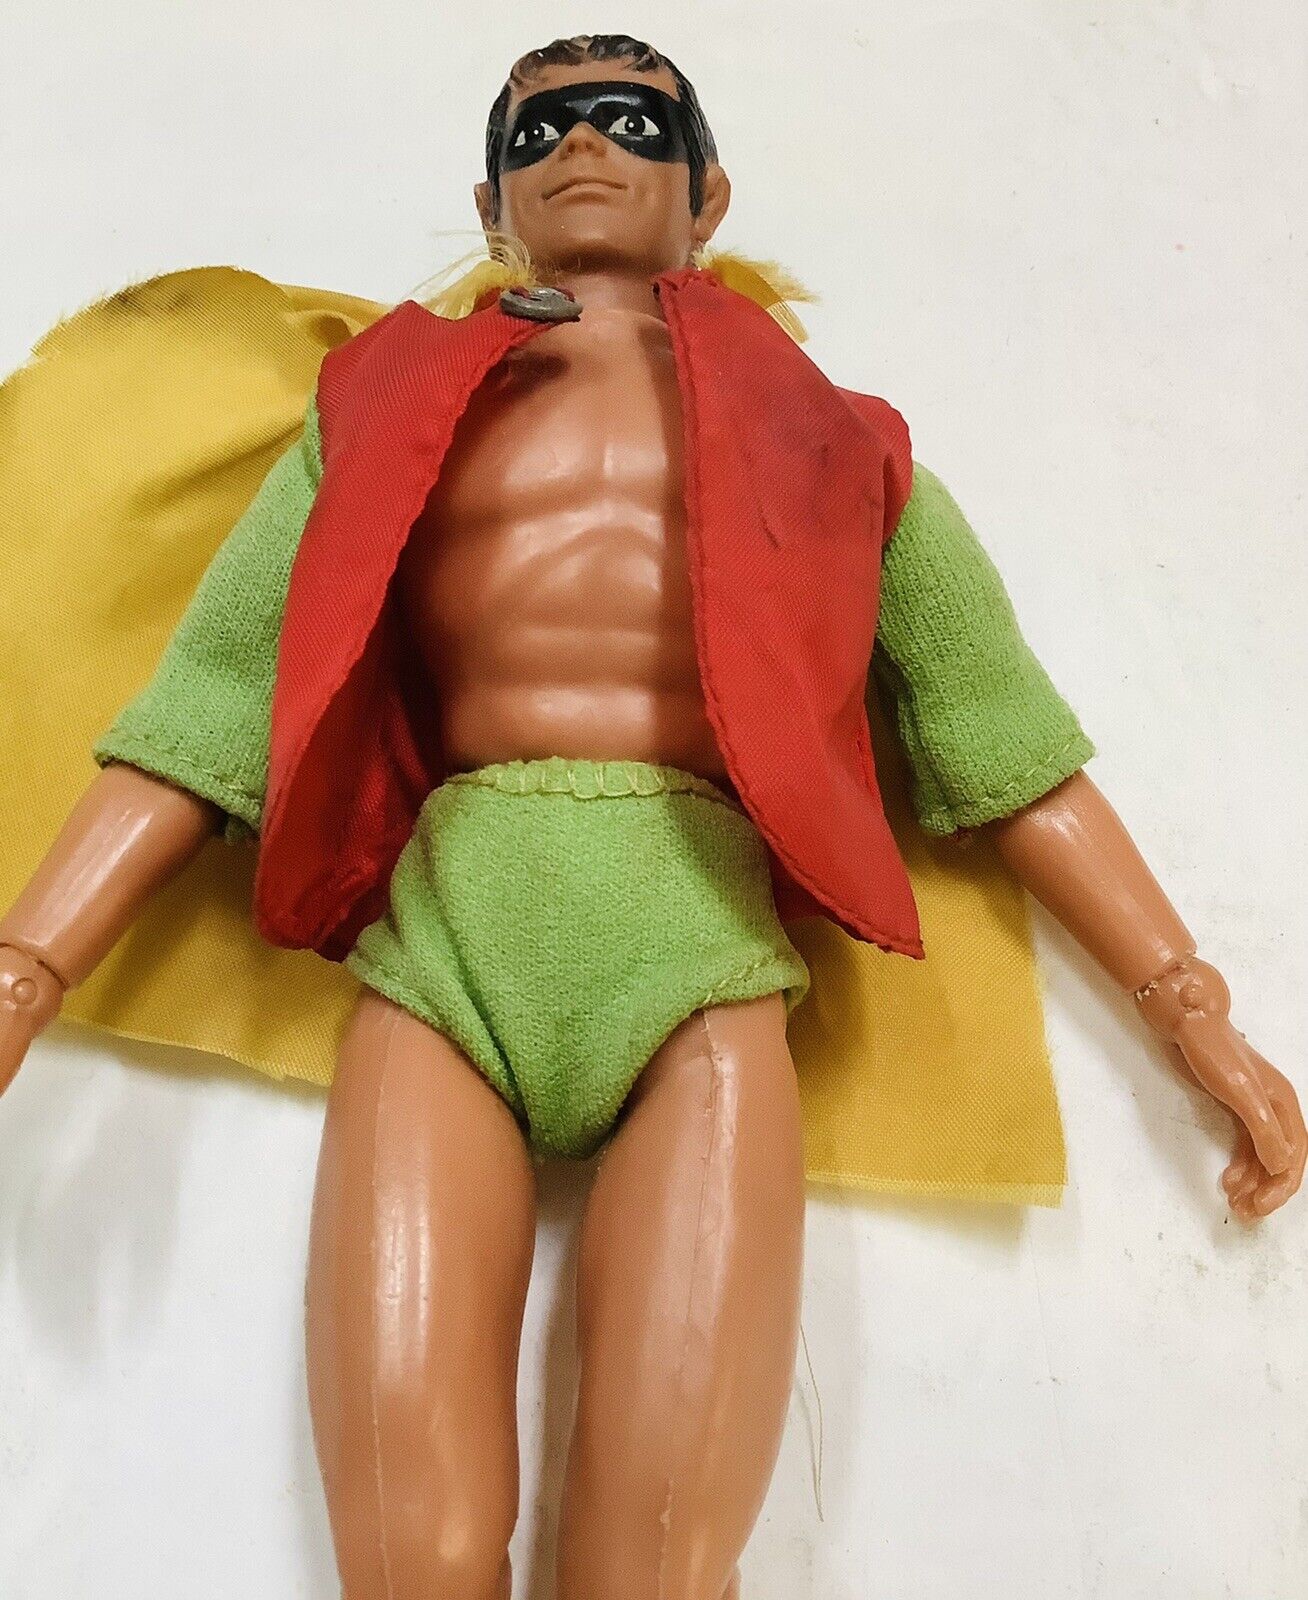 VINTAGE PAIR OF 1974 MEGO ROBIN ACTION FIGURES USED..ONE LEG BROKEN eBay picture pic